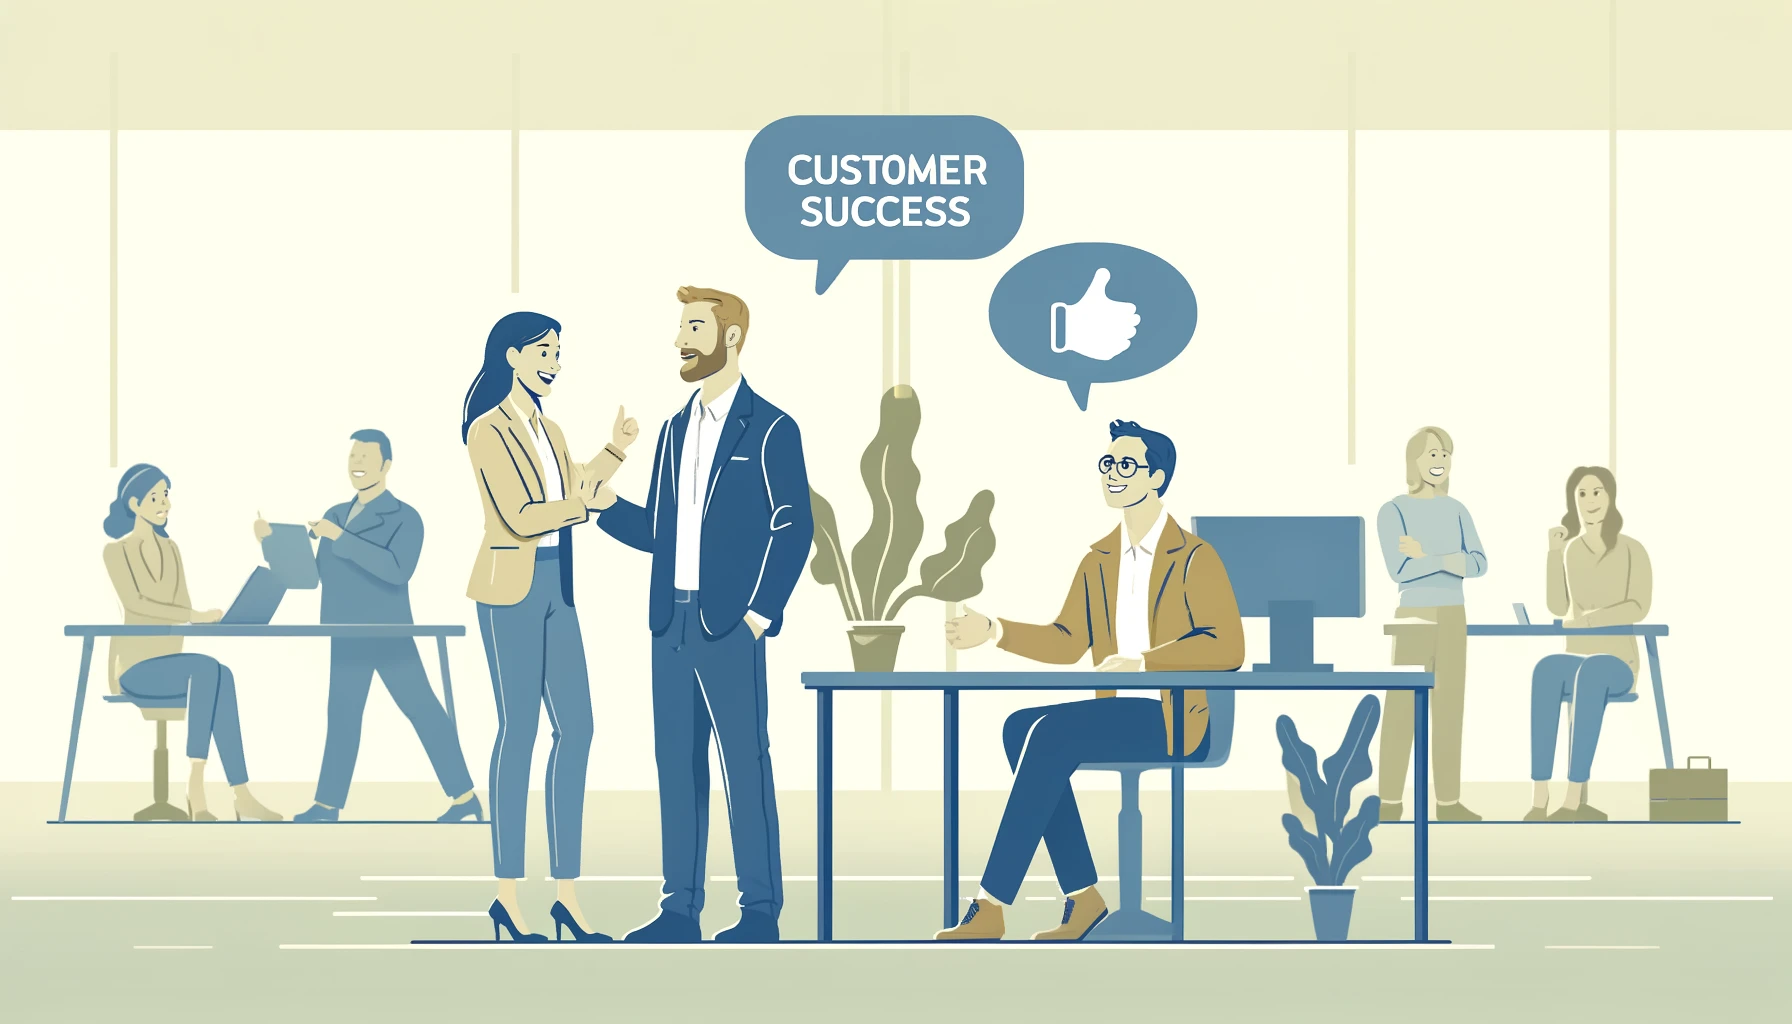 Is Customer Success Manager Better Than Project Manager?